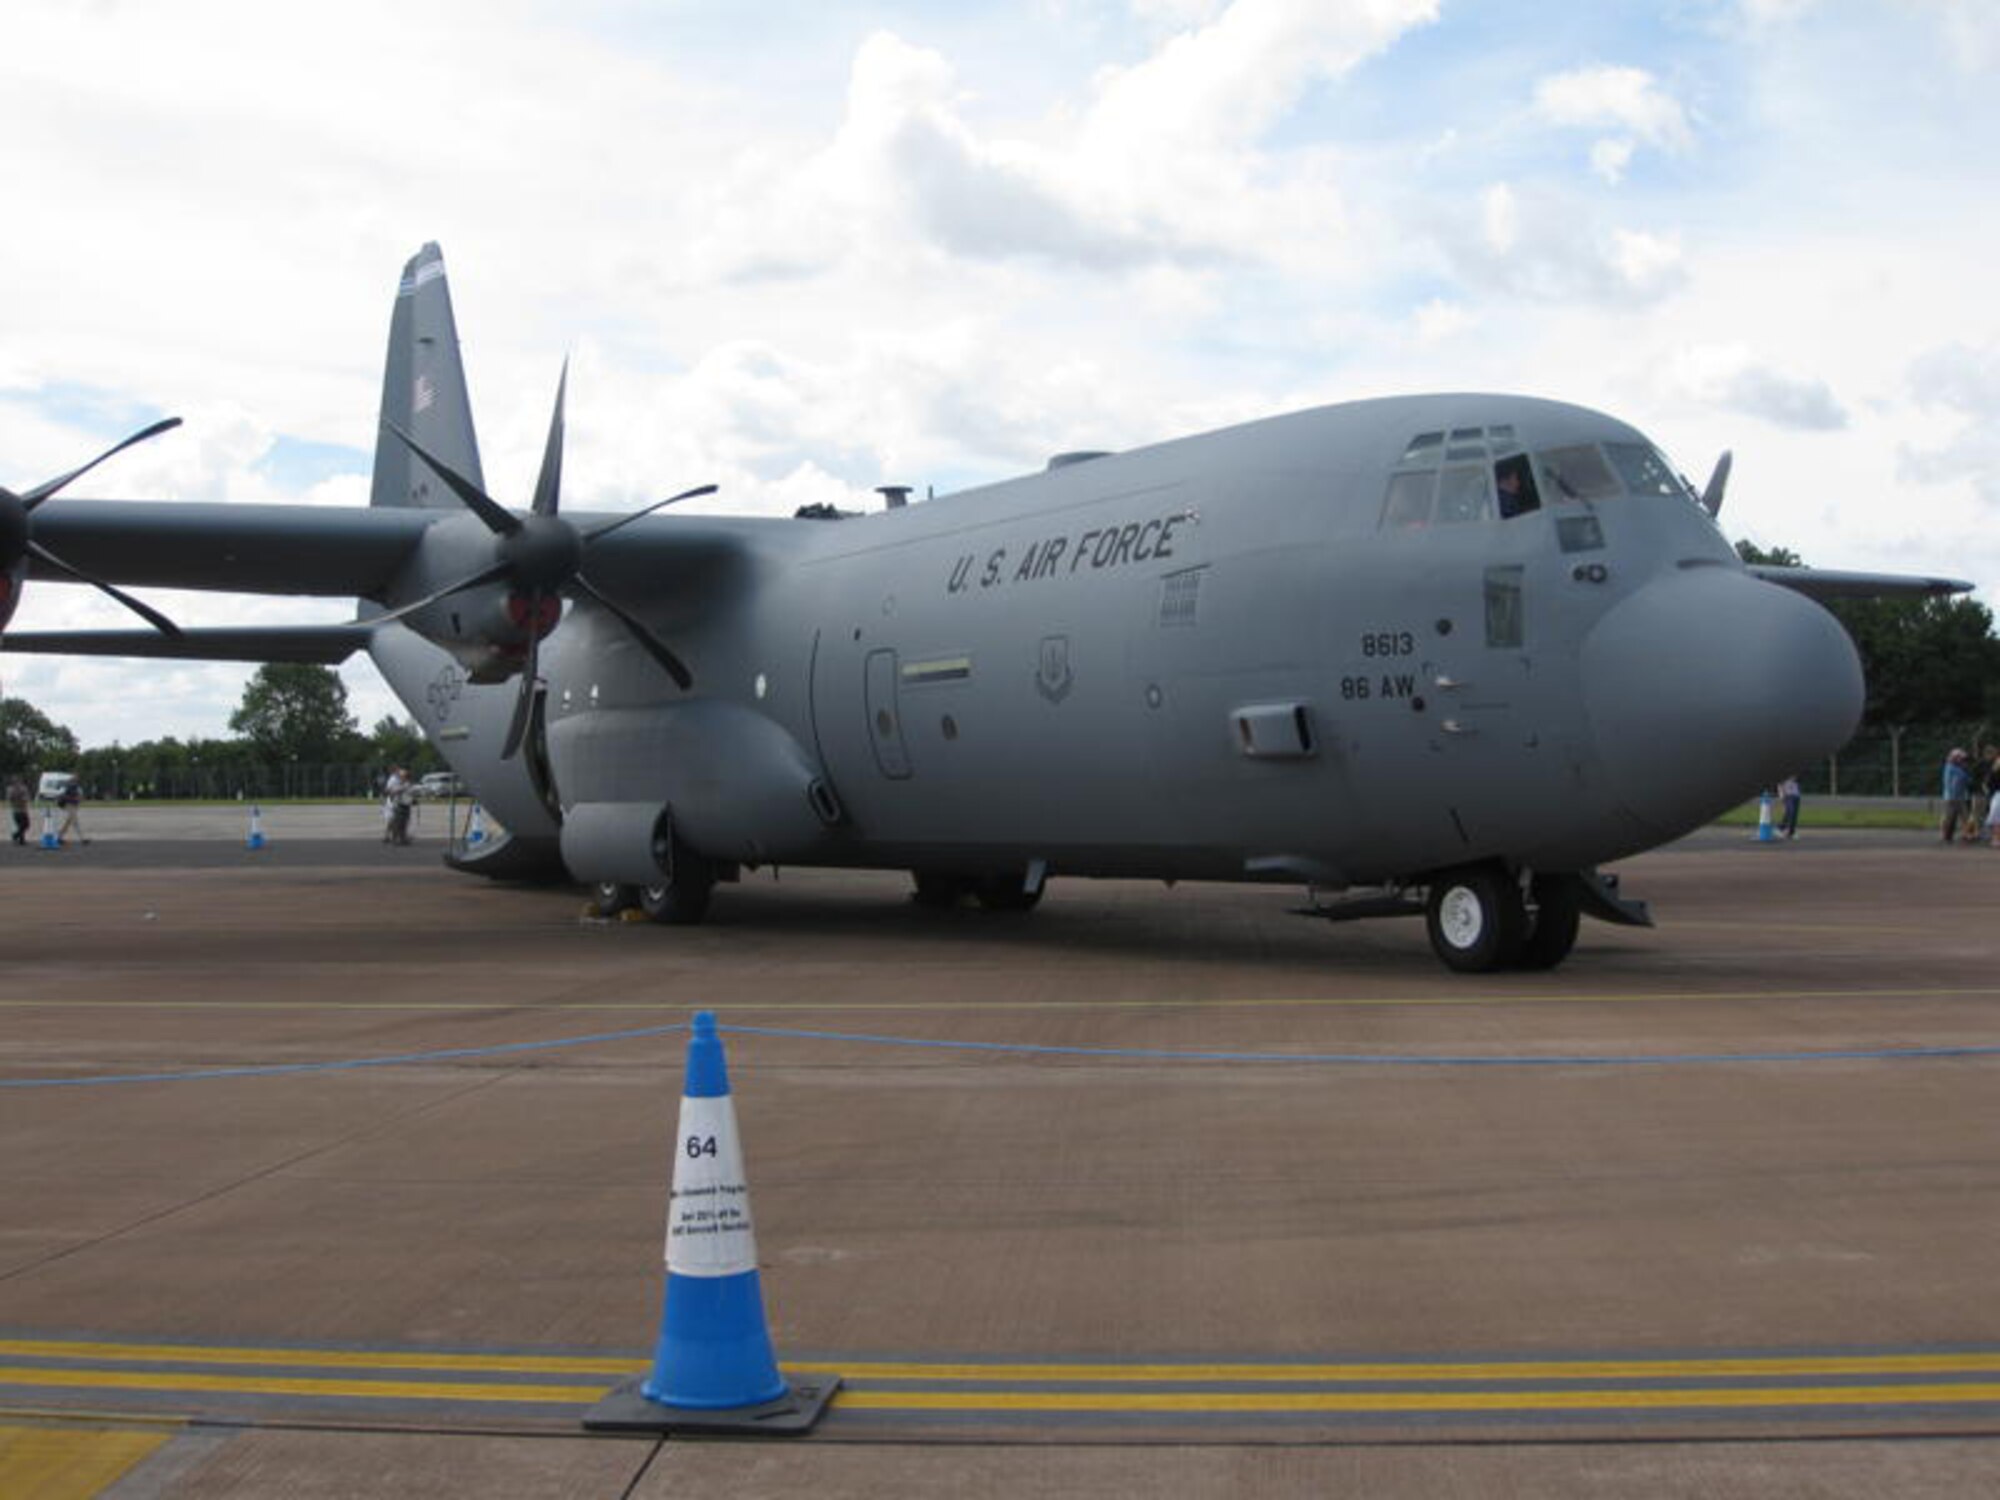 A U.S. Air Force C-130J based out of Ramstein Air Base, Germany sits on the ramp at the start of the Royal International Air Tattoo July 17, 2010, at RAF Fairford, United Kingdom. (U.S. Air Force photo/Chief Master Sgt. Greg Wade) 